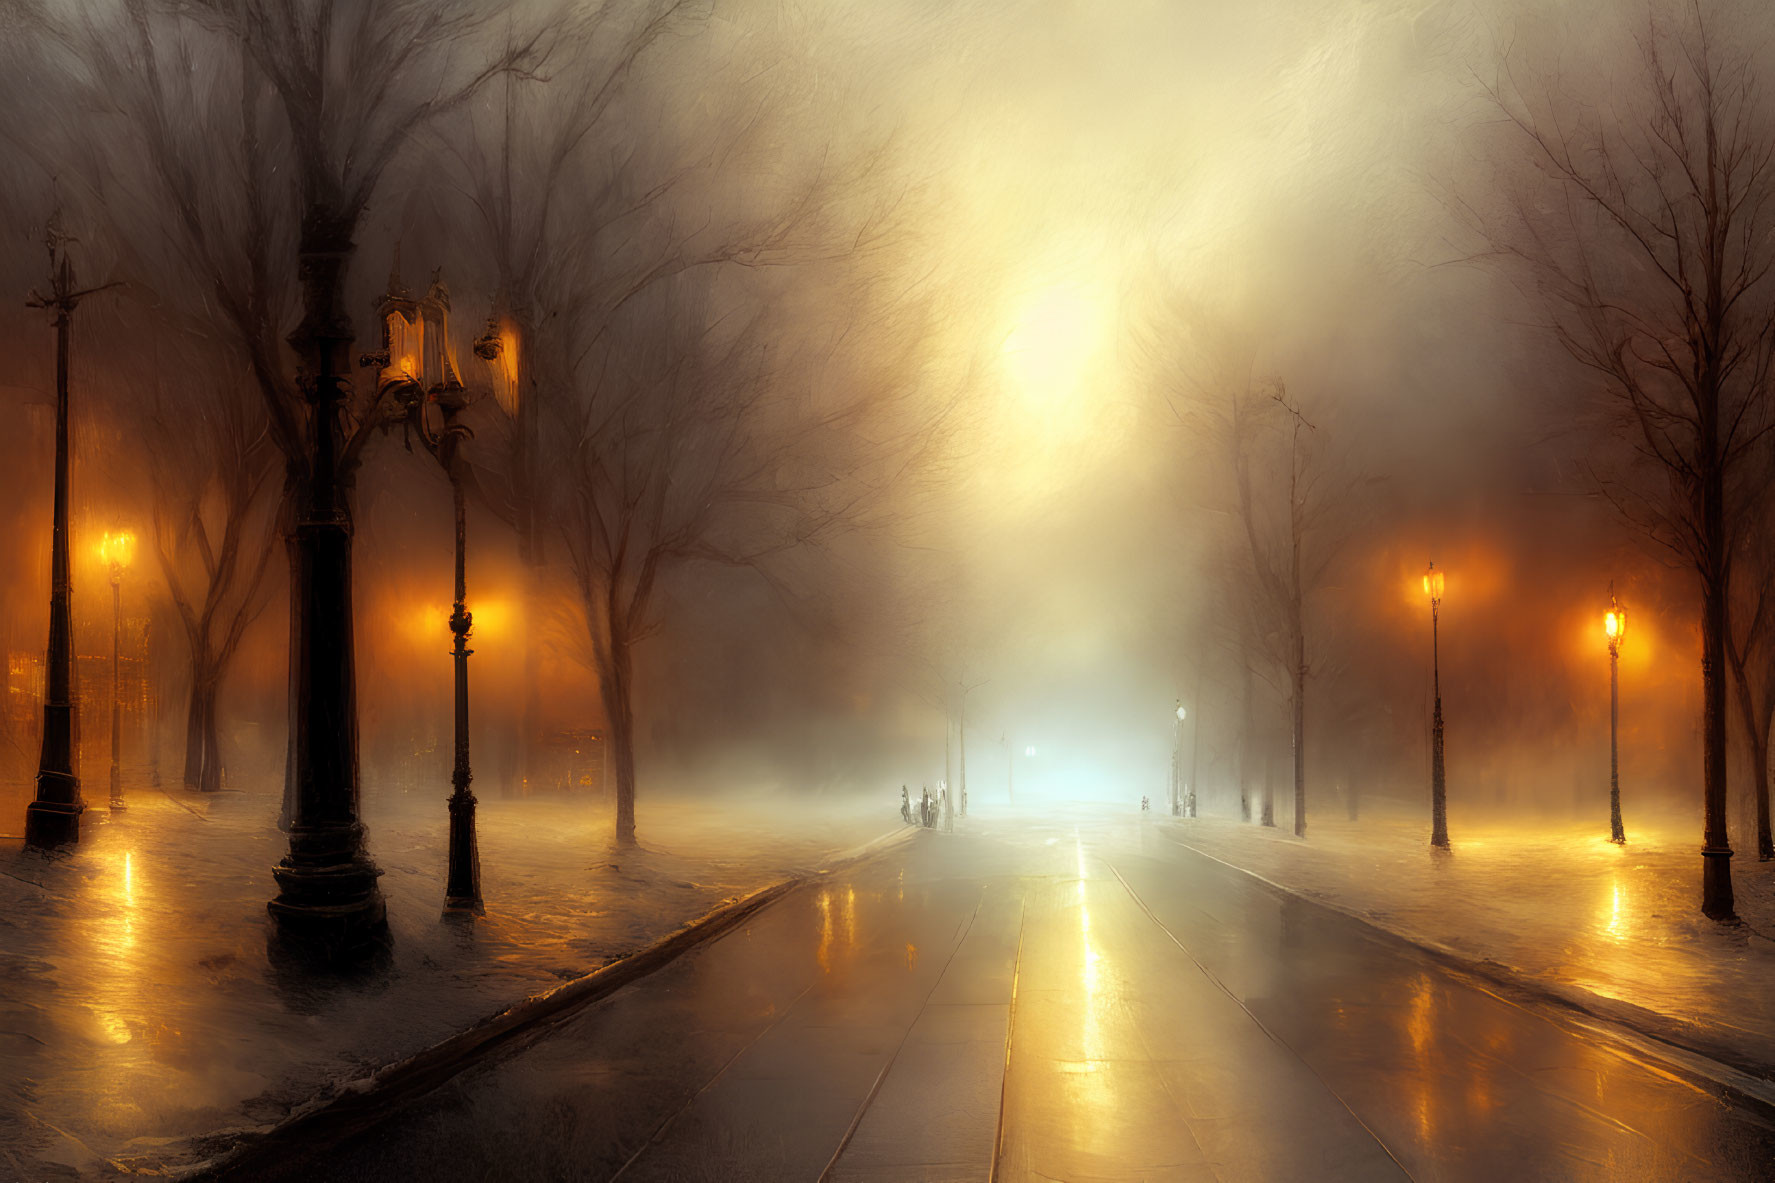 Foggy illuminated pathway with glowing street lamps and bare trees